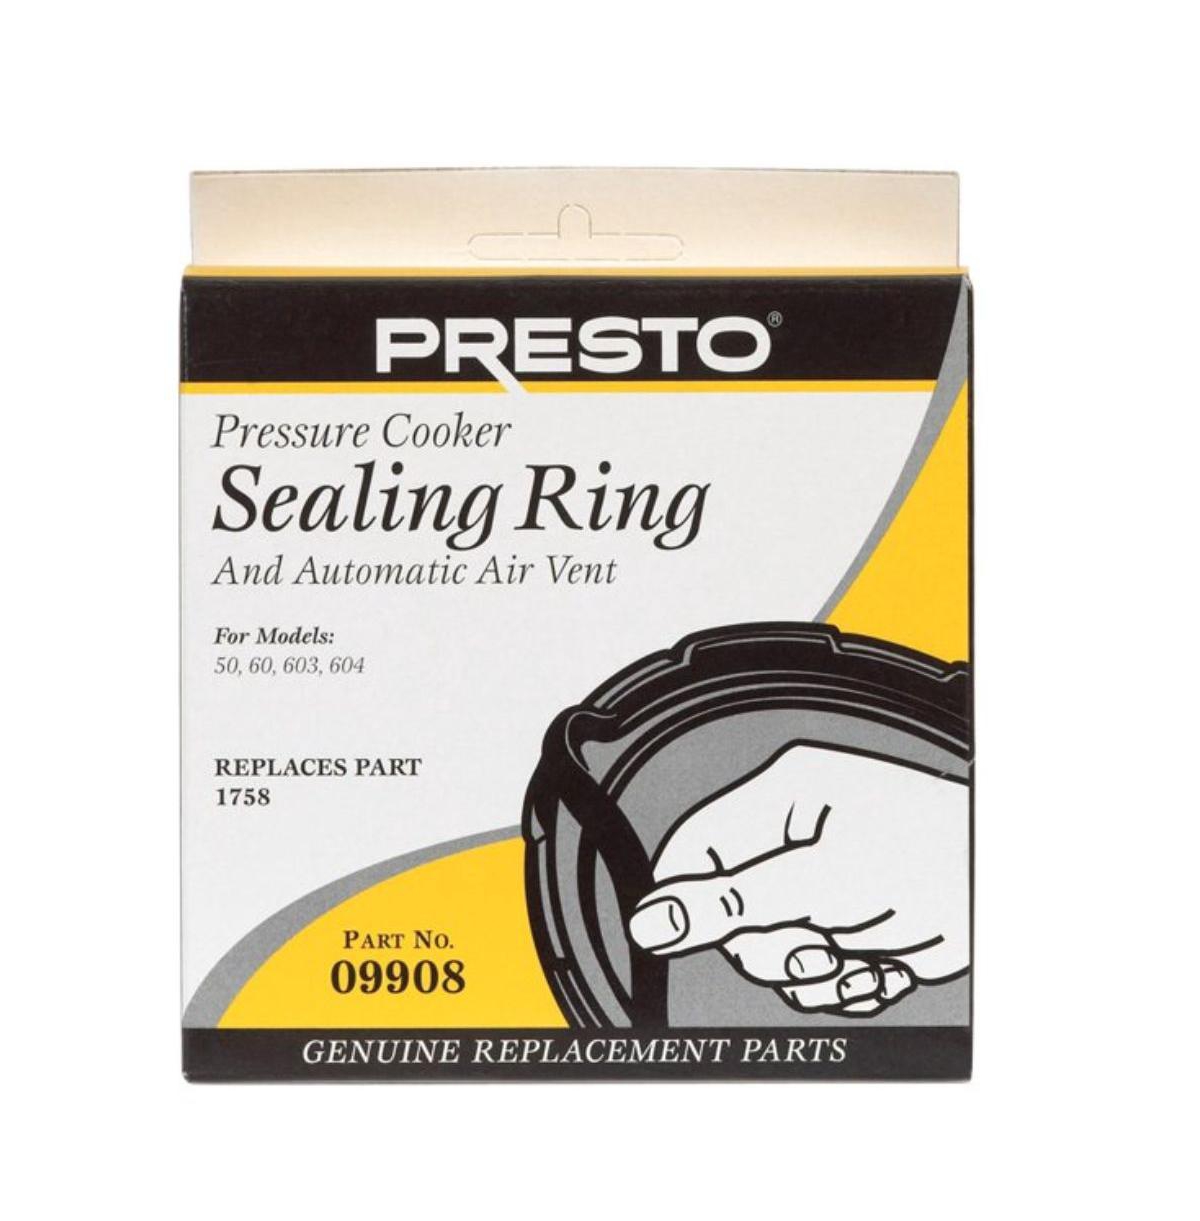 Presto 09908 Pressure Cooker Sealing Ring And Automatic Air Vent In Black